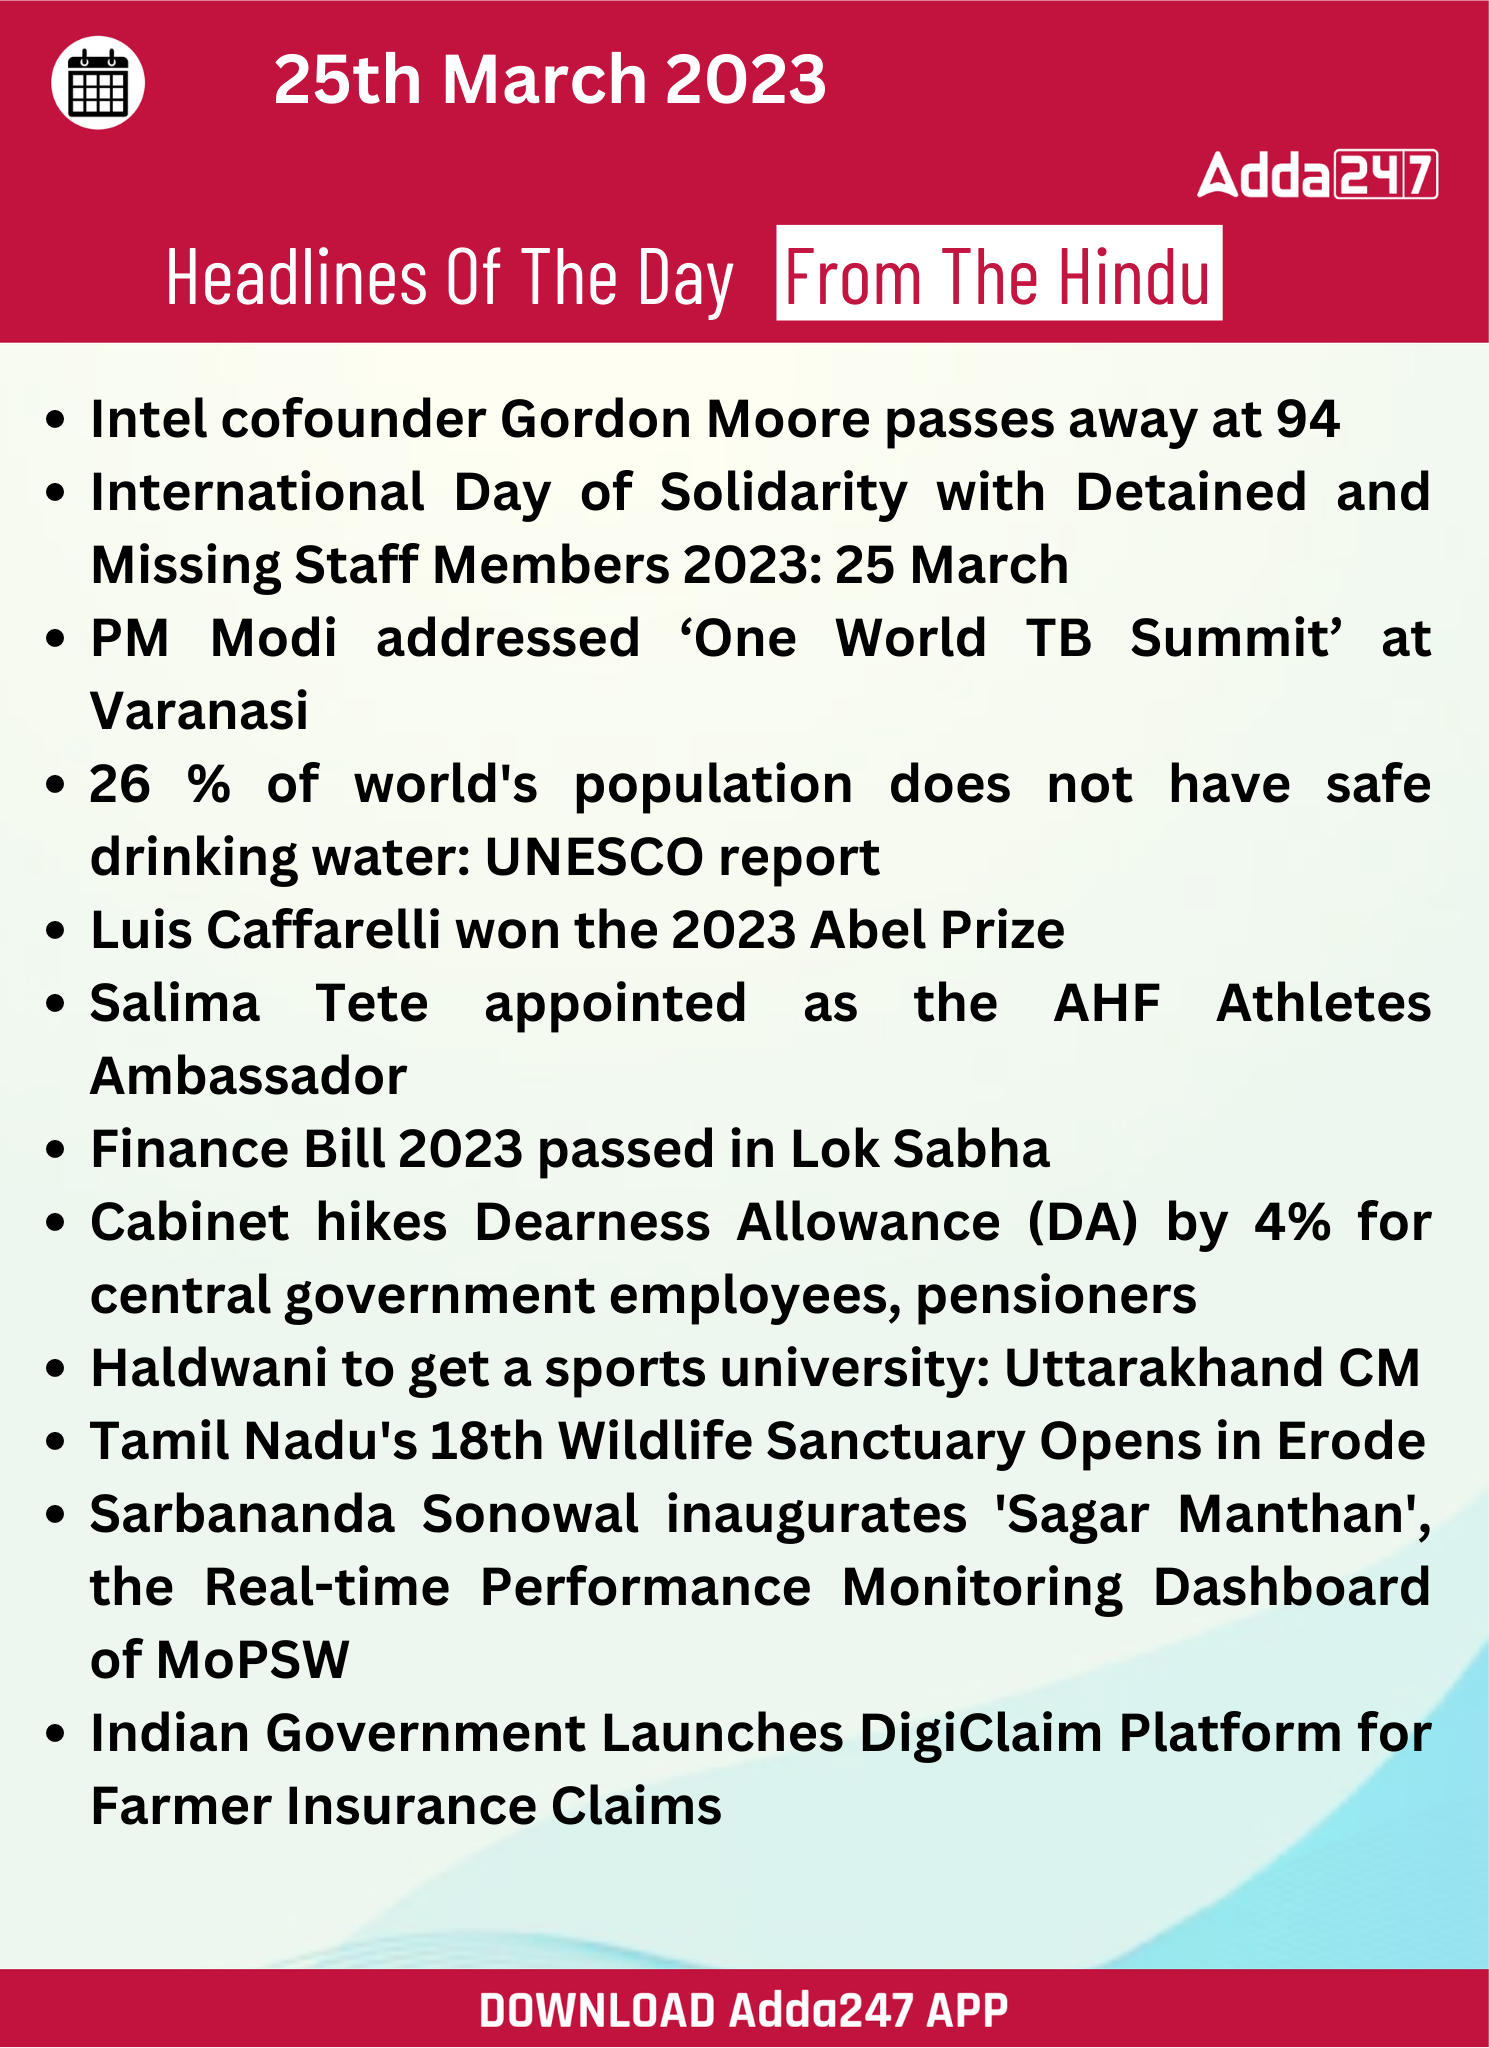 Daily Current Affairs 25th March 2023_19.1